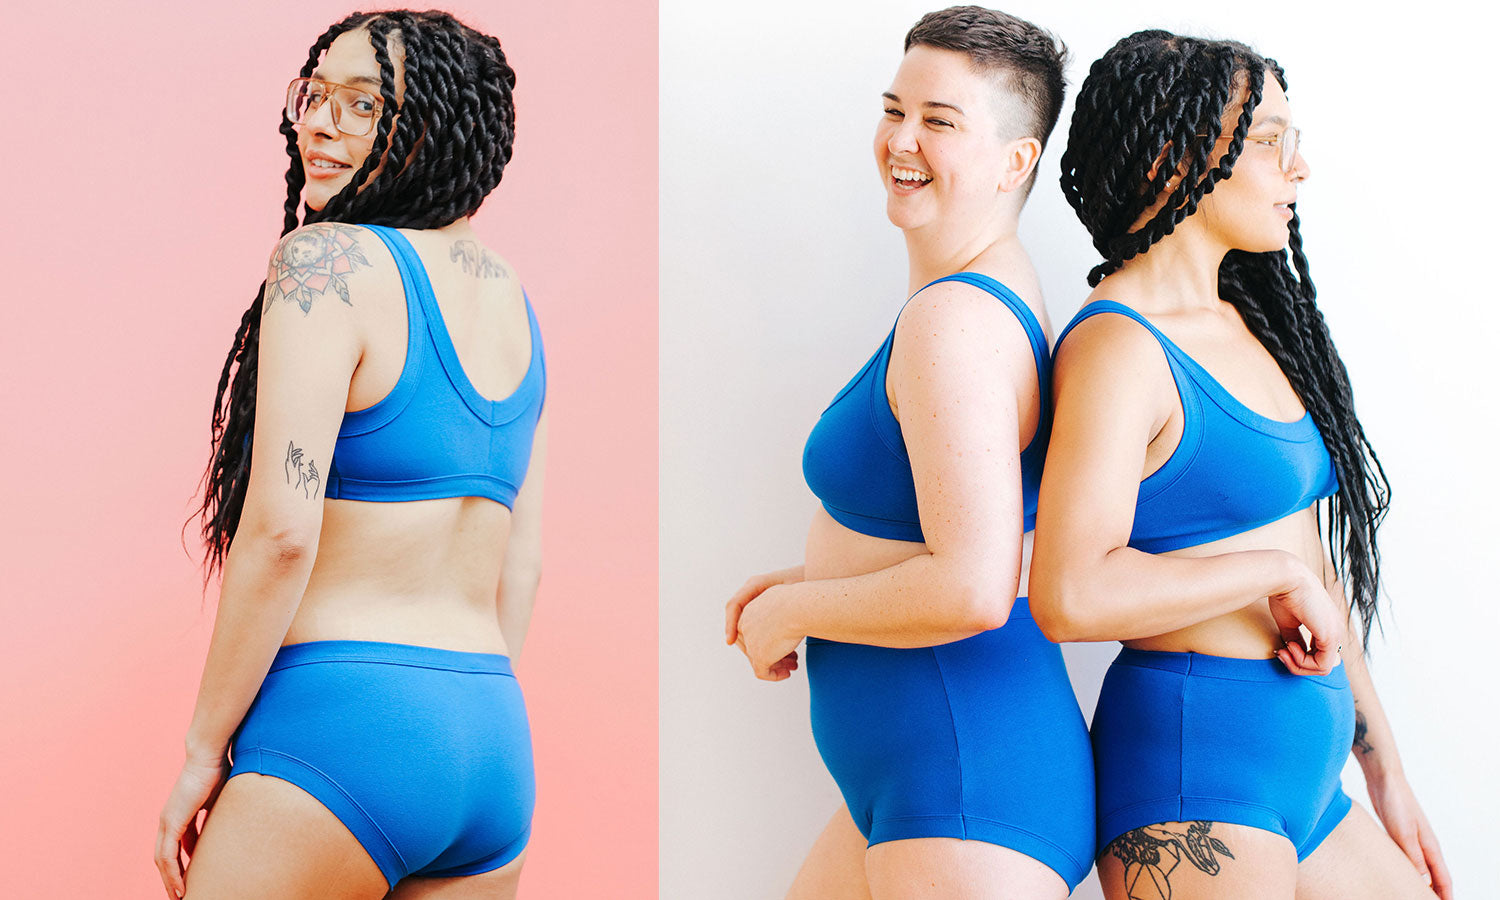 Models wearing Thunderpants Bralette and various underwear style sets in Blueberry Blue.